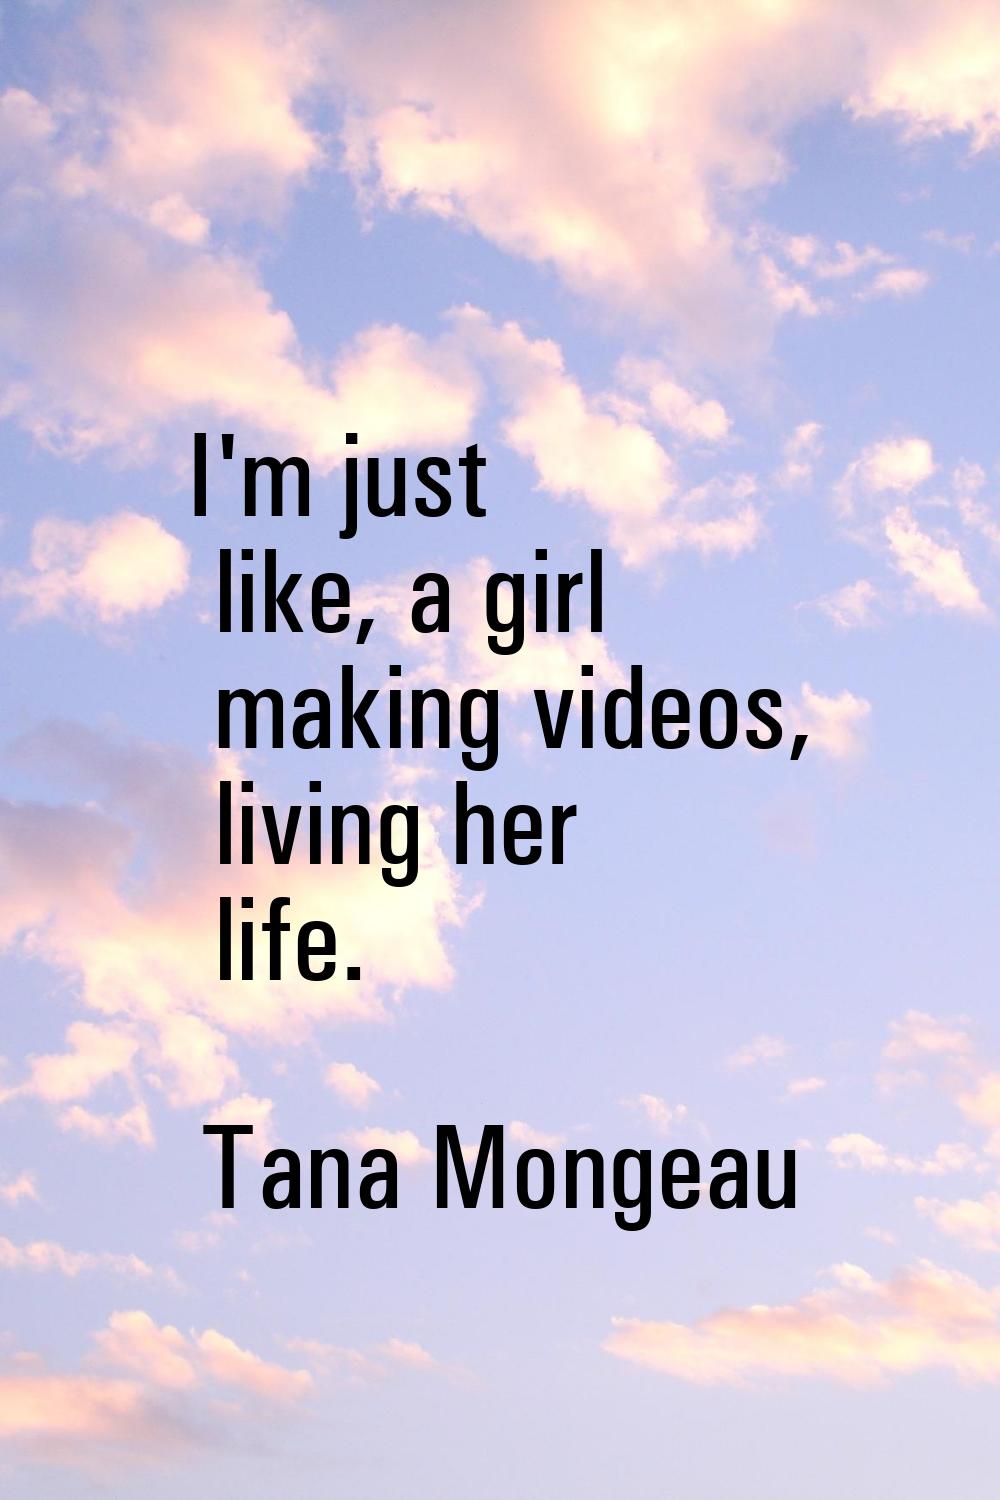 I'm just like, a girl making videos, living her life.